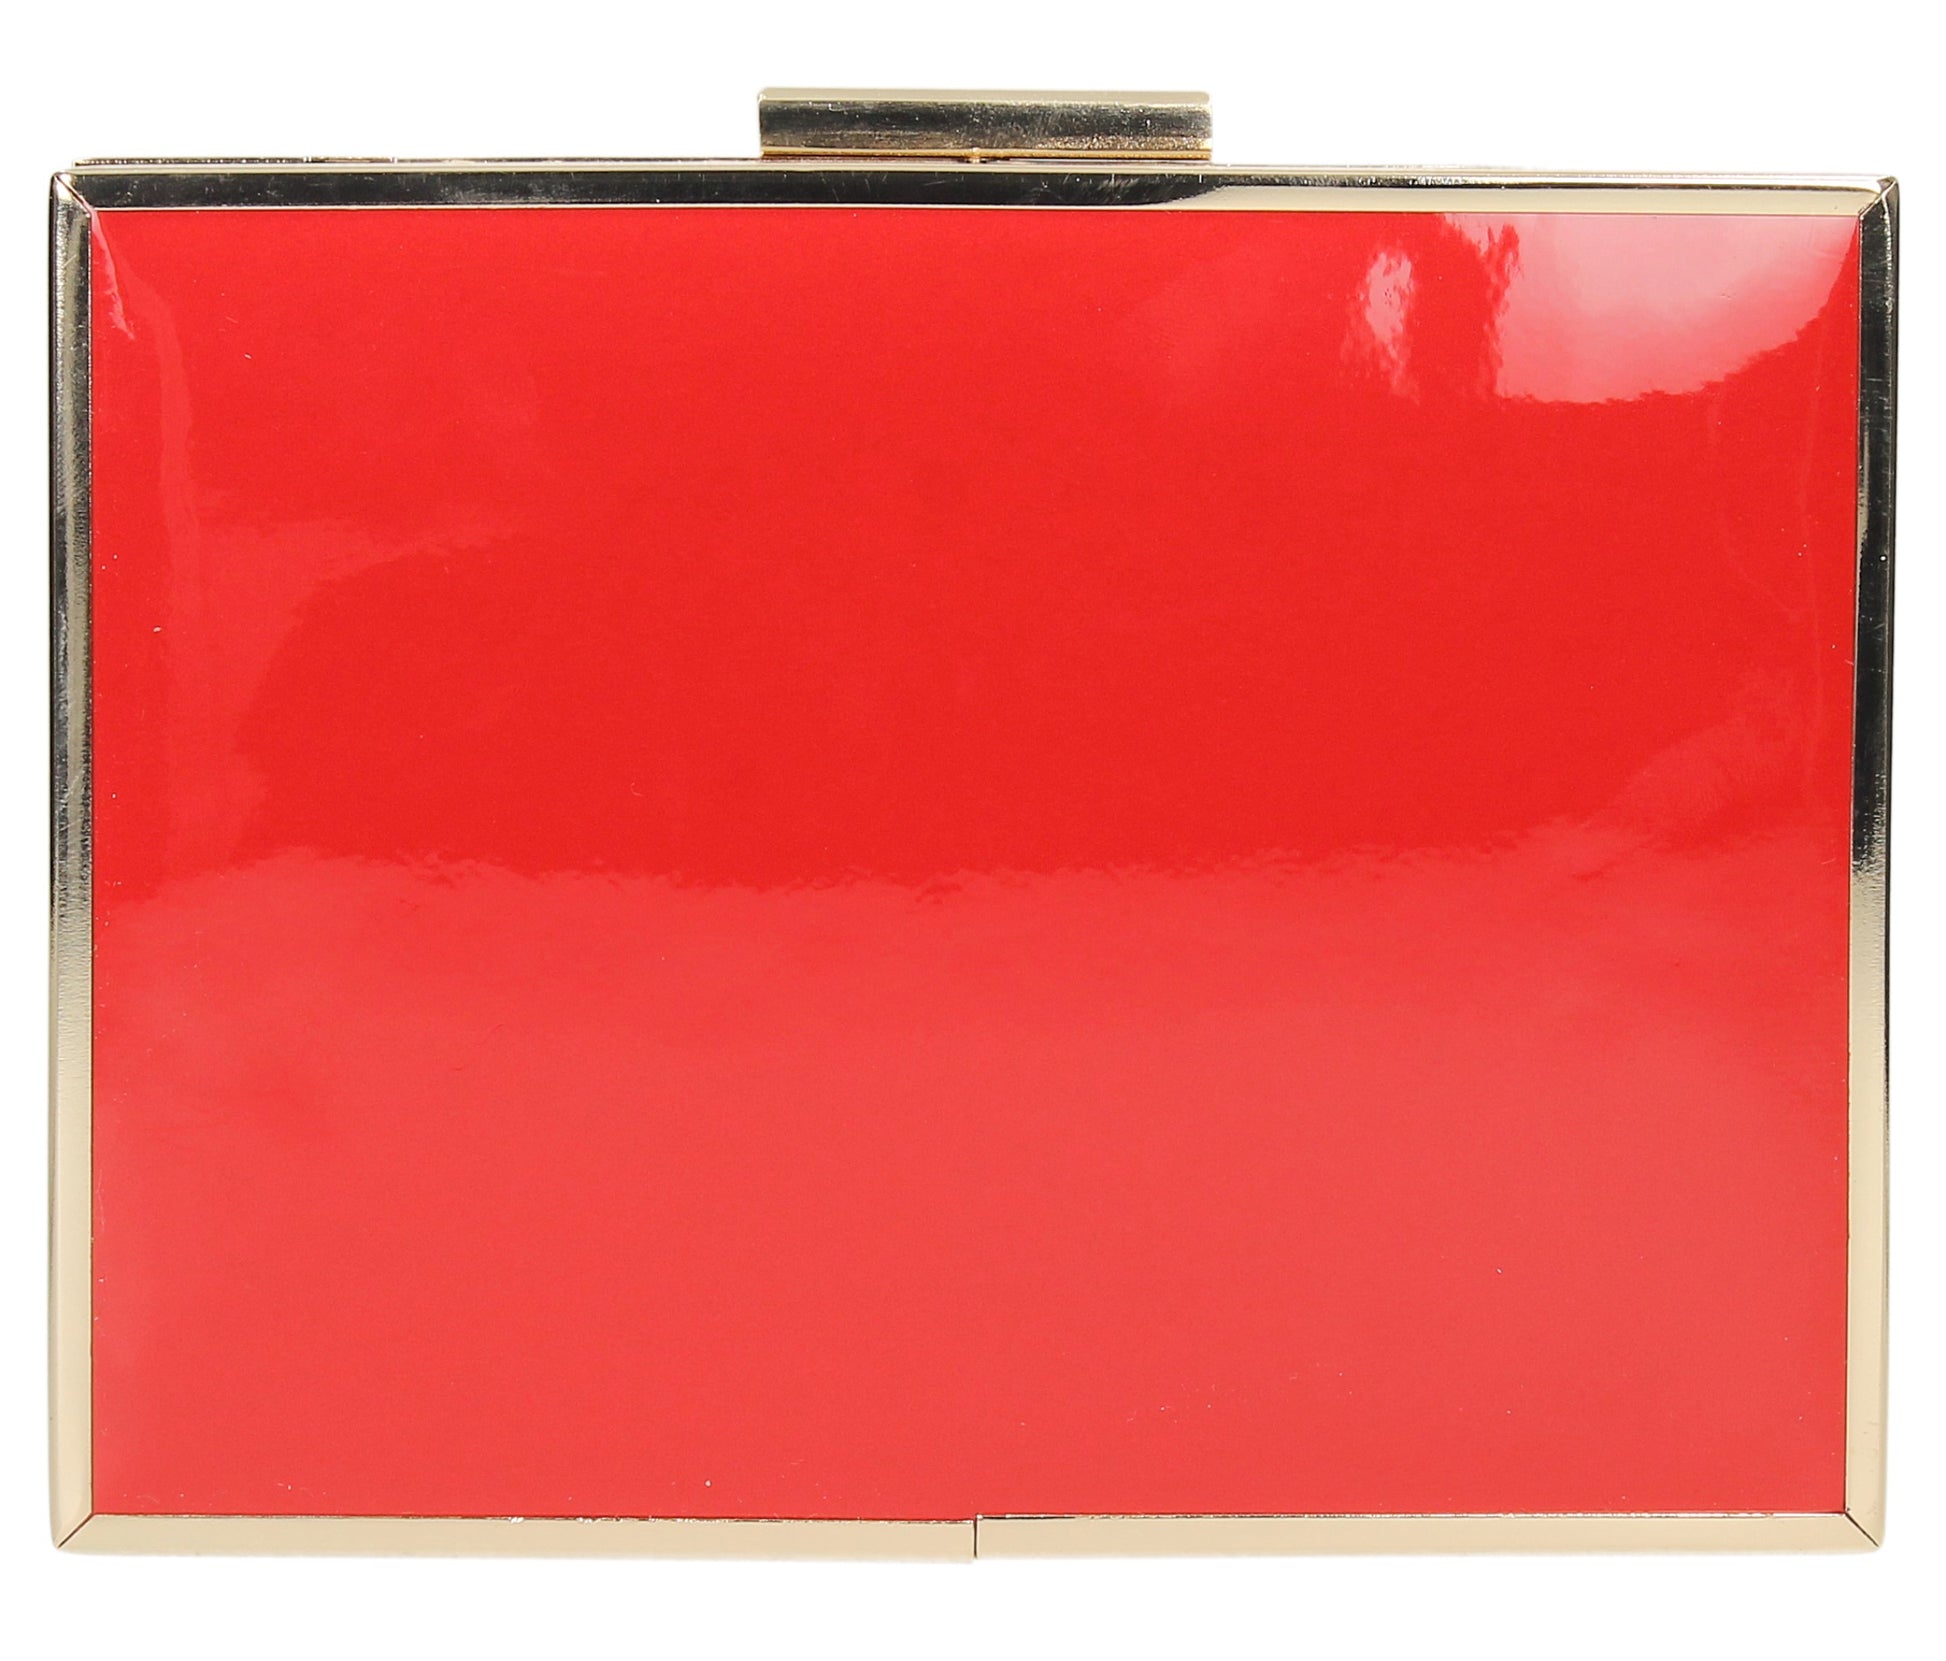 SWANKYSWANS Kate Box Clutch Bag Red Cute Cheap Clutch Bag For Weddings School and Work